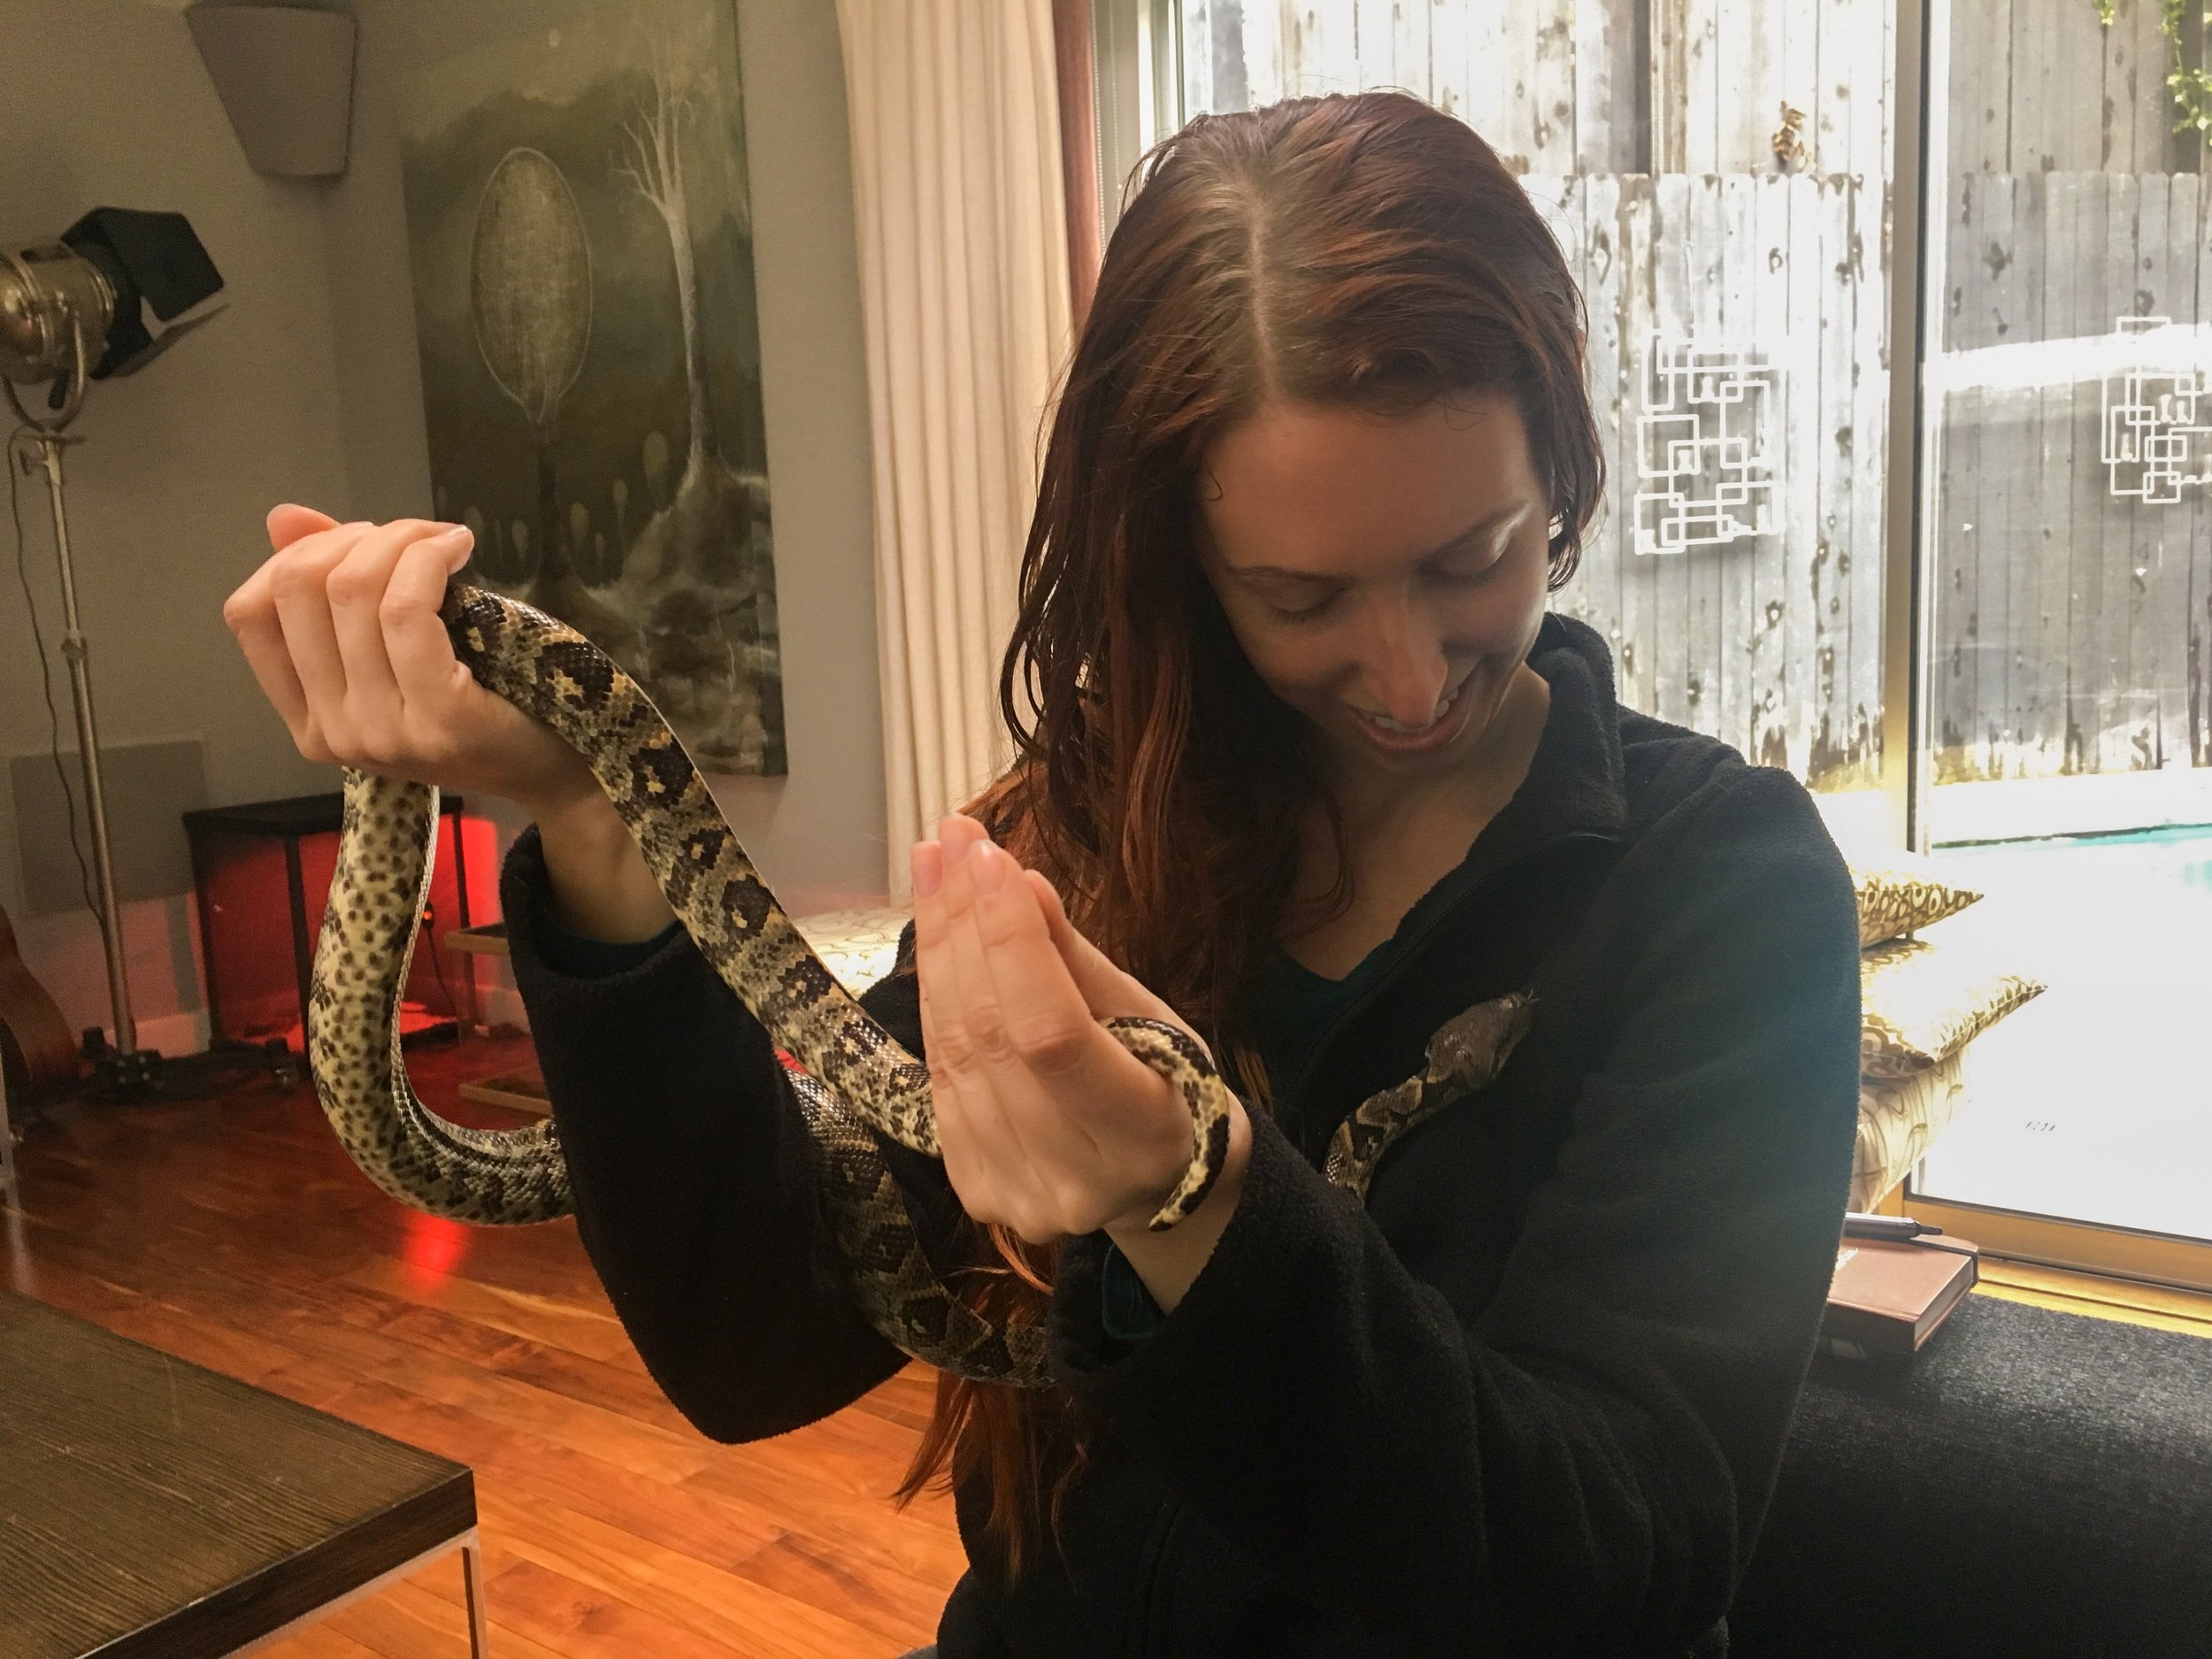 My first time holding a snake!